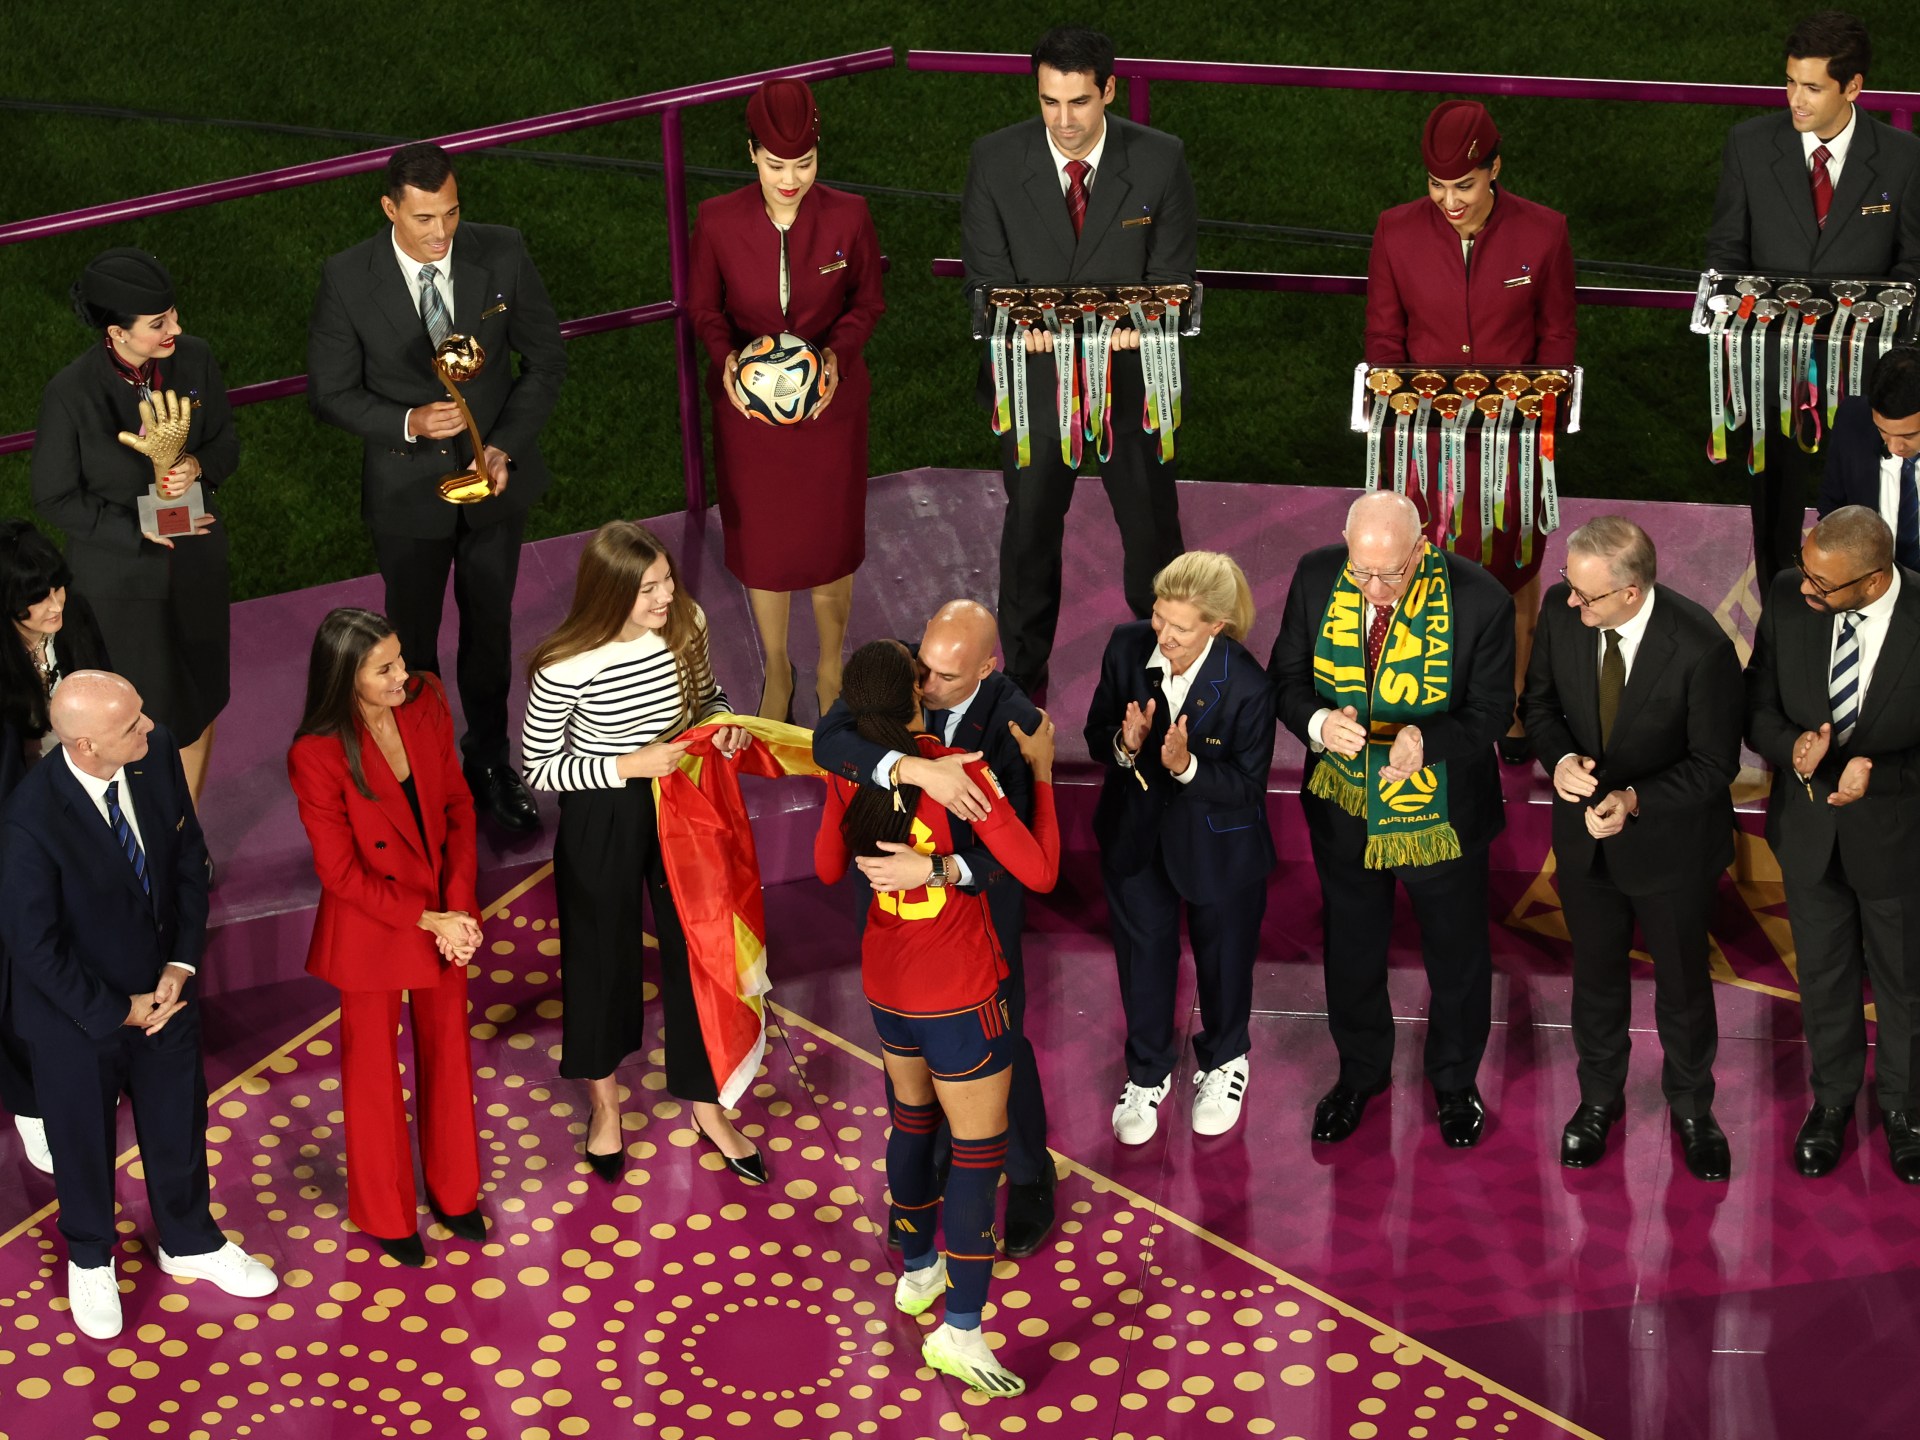 The president of Spanish football is criticized for kissing a player in the women’s team |  Women’s World Cup news